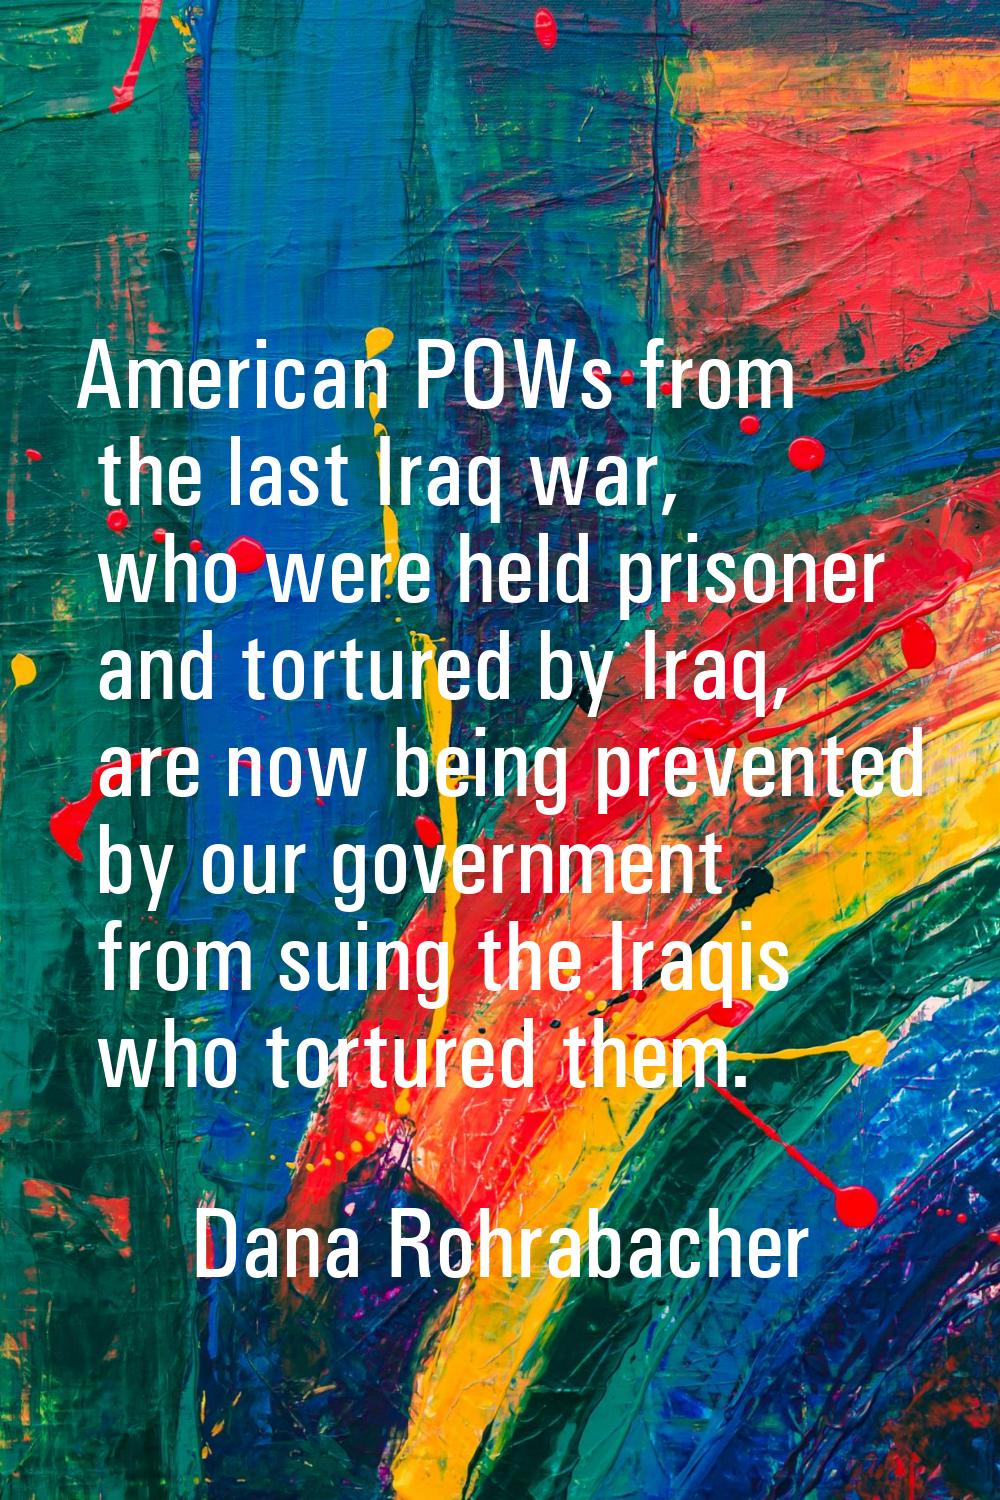 American POWs from the last Iraq war, who were held prisoner and tortured by Iraq, are now being pr